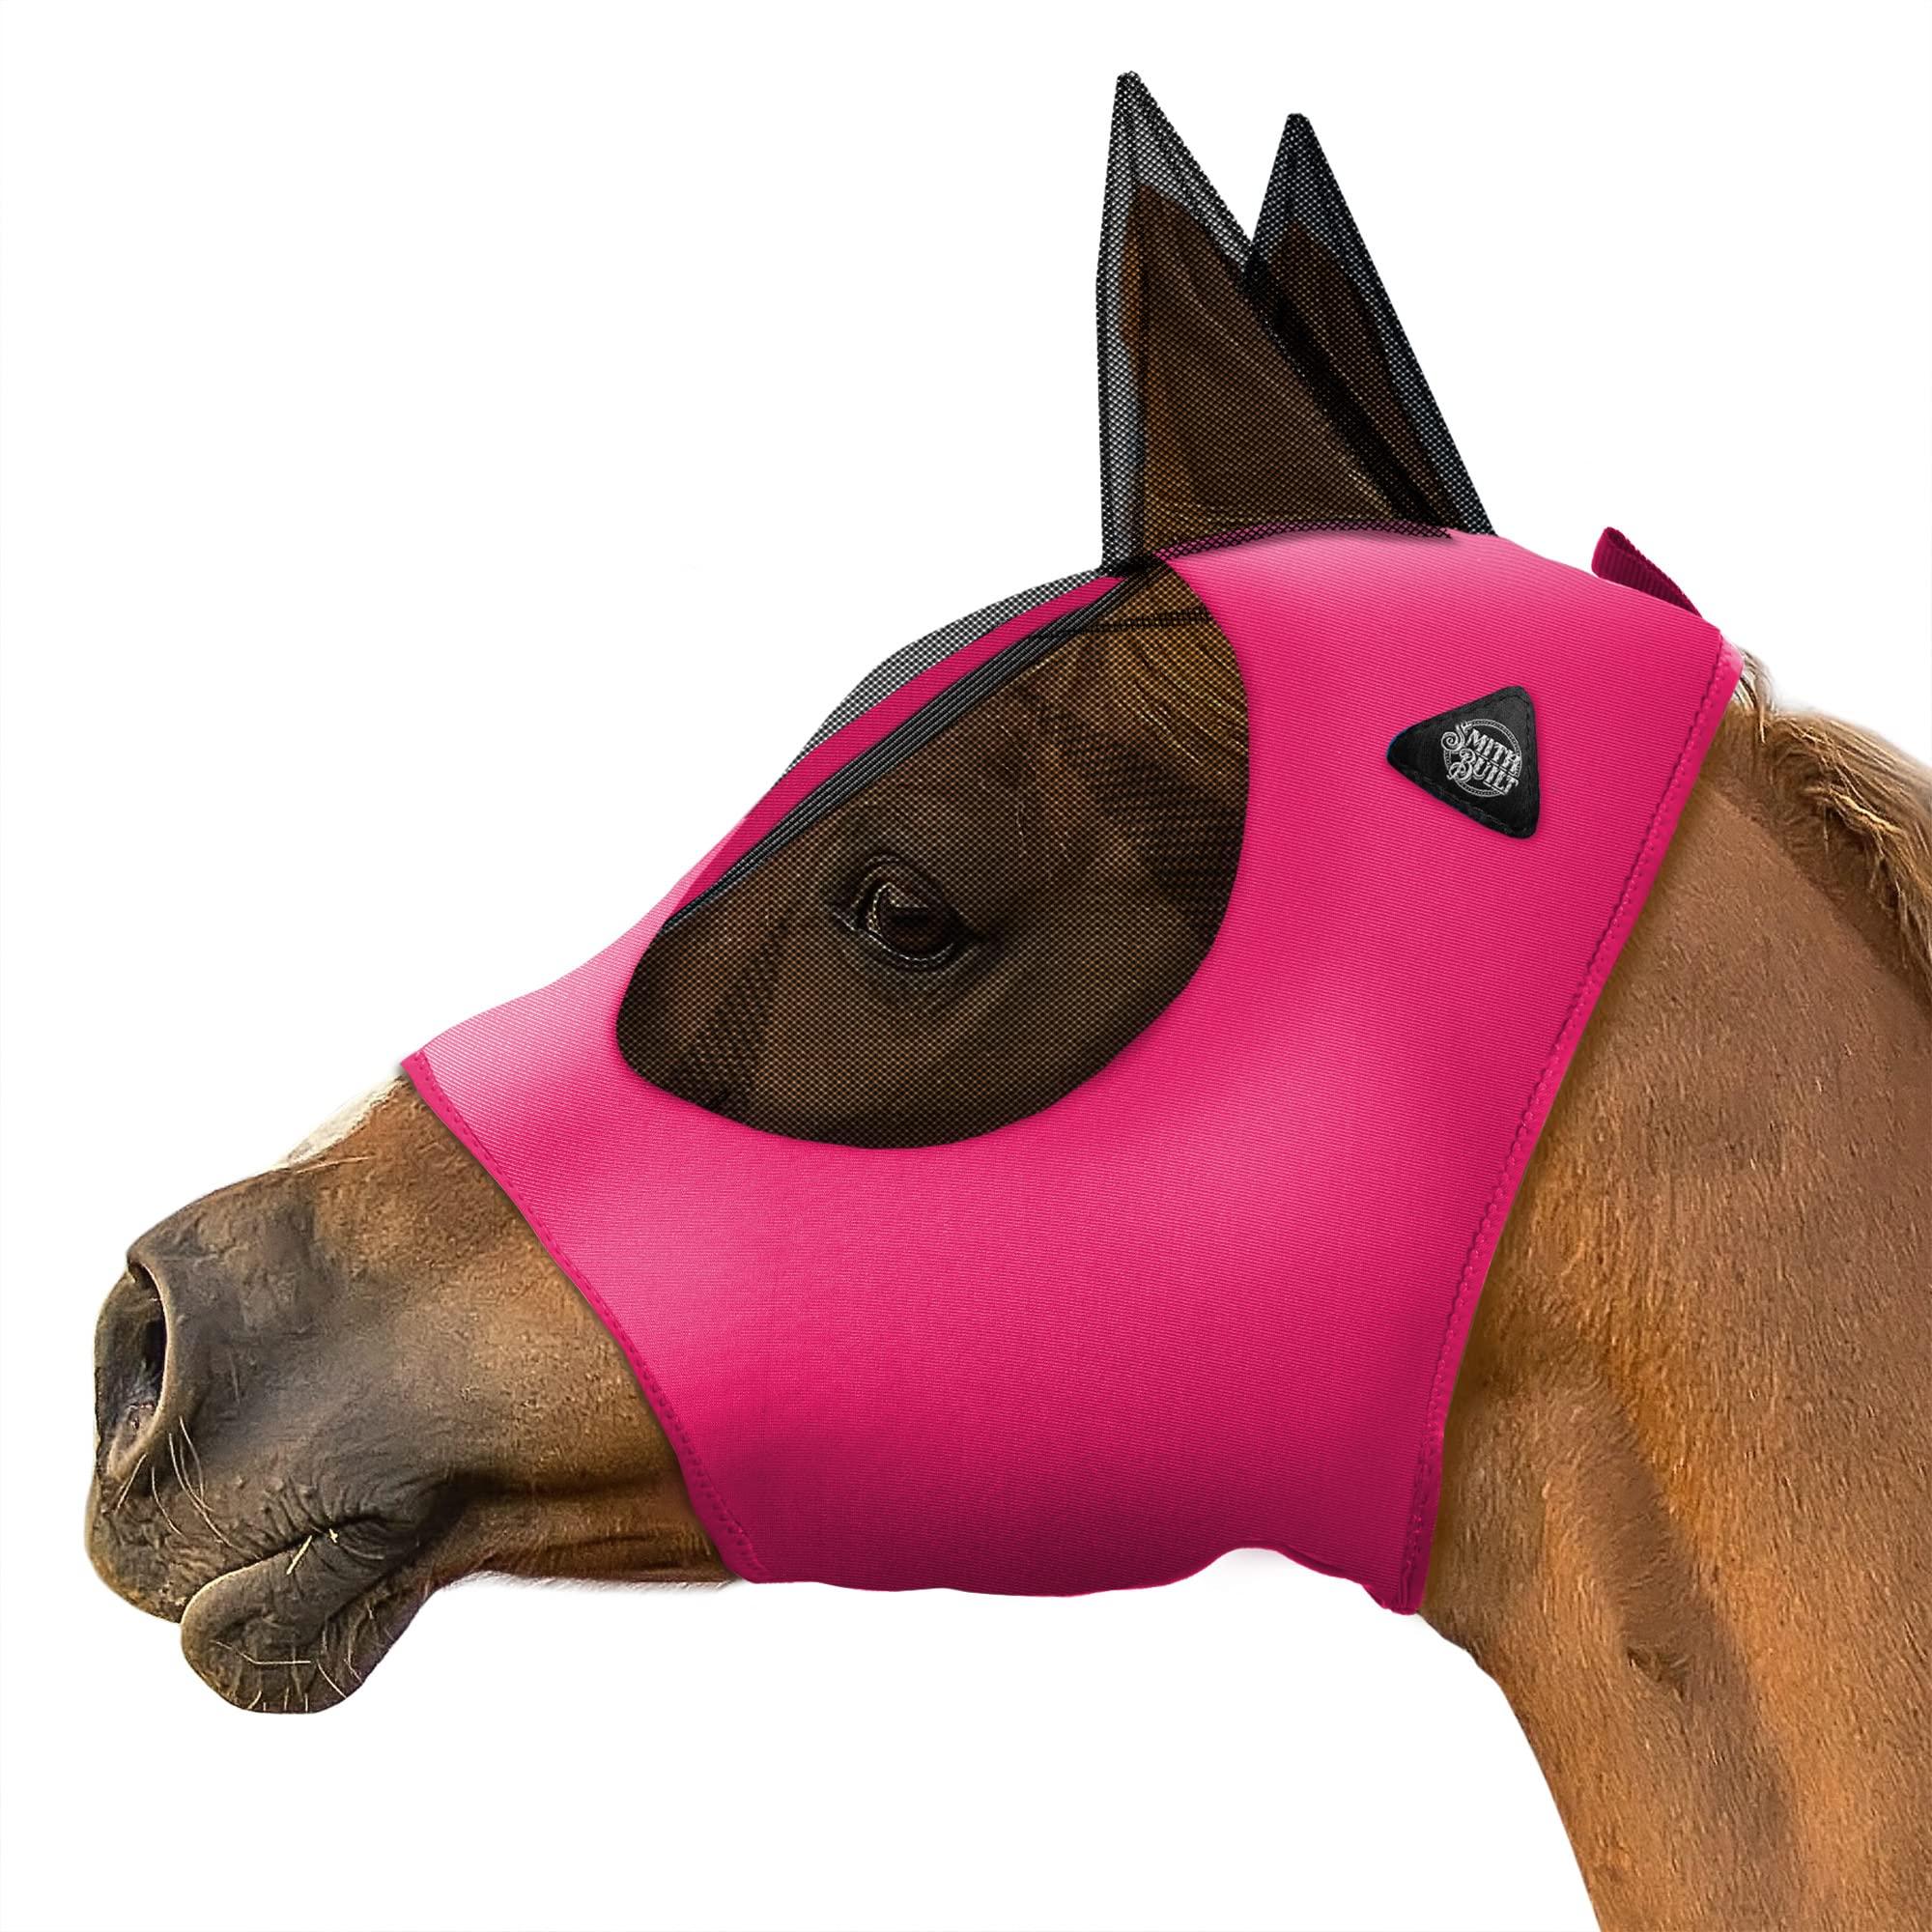 SmithBuilt Horse Fly Mask (Pink, Pony) - Mesh Eyes and Ears, Breathable Fabric, UV Protection